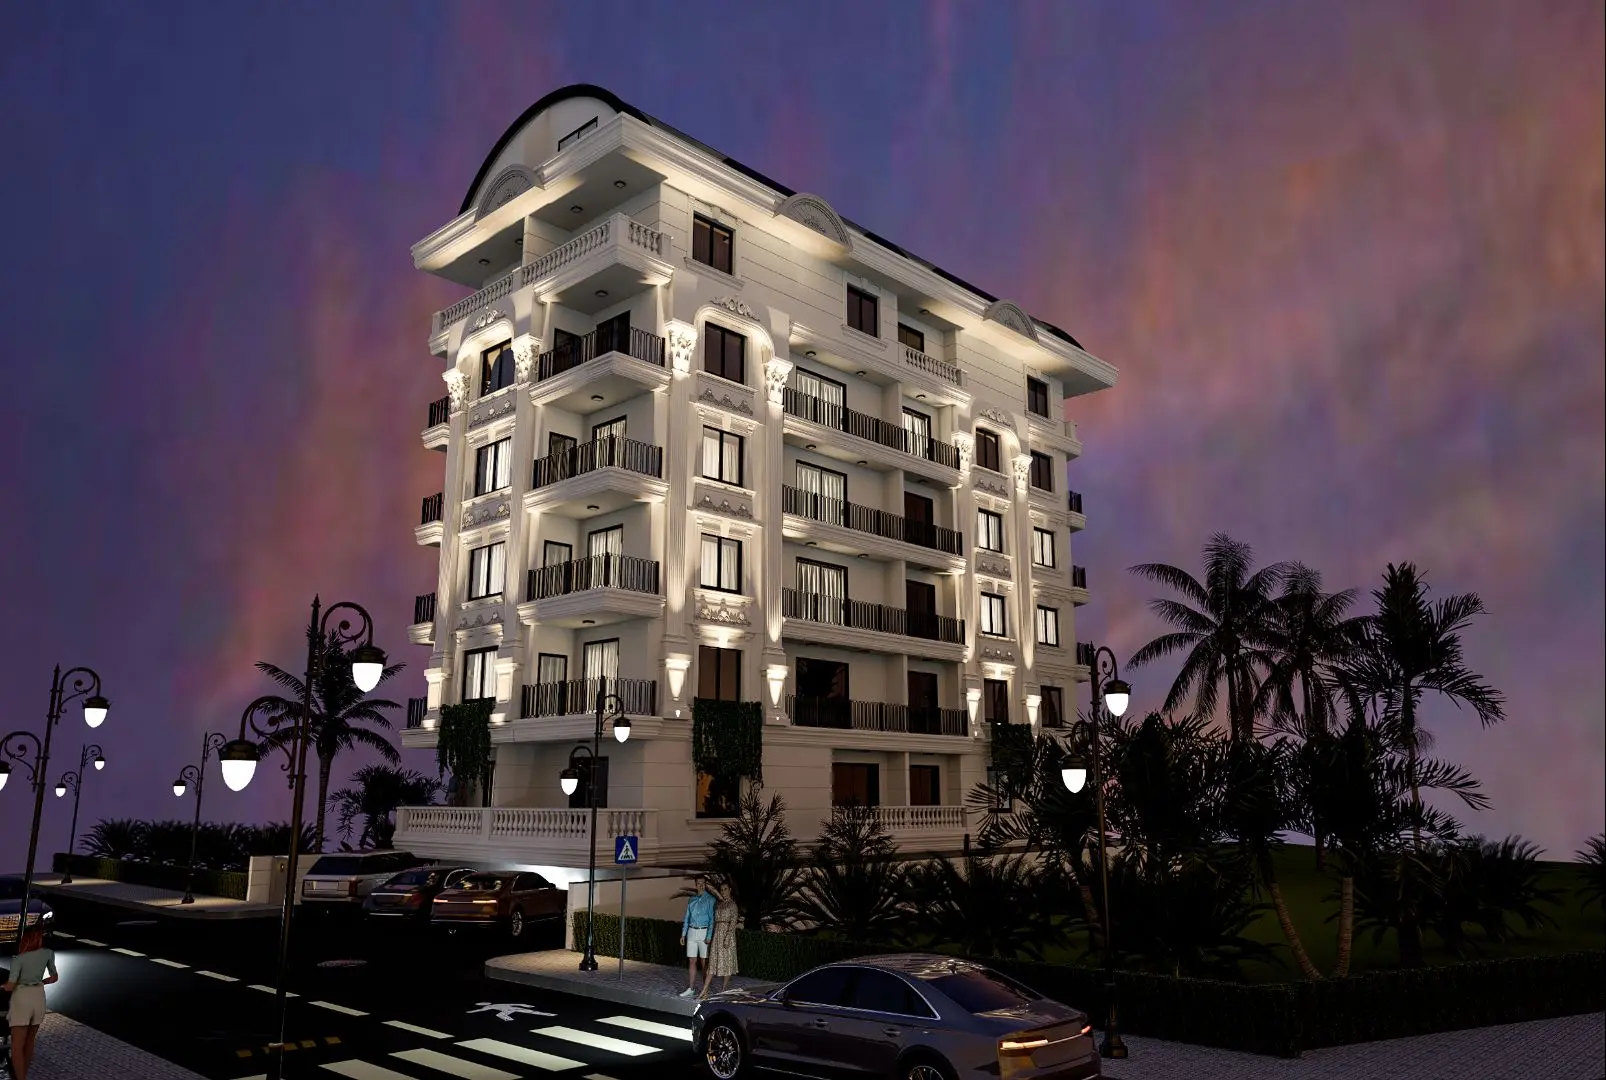 NEW HOUSING PROJECT IN A PERFECT LOCATION IN THE CENTER OF ALANYA